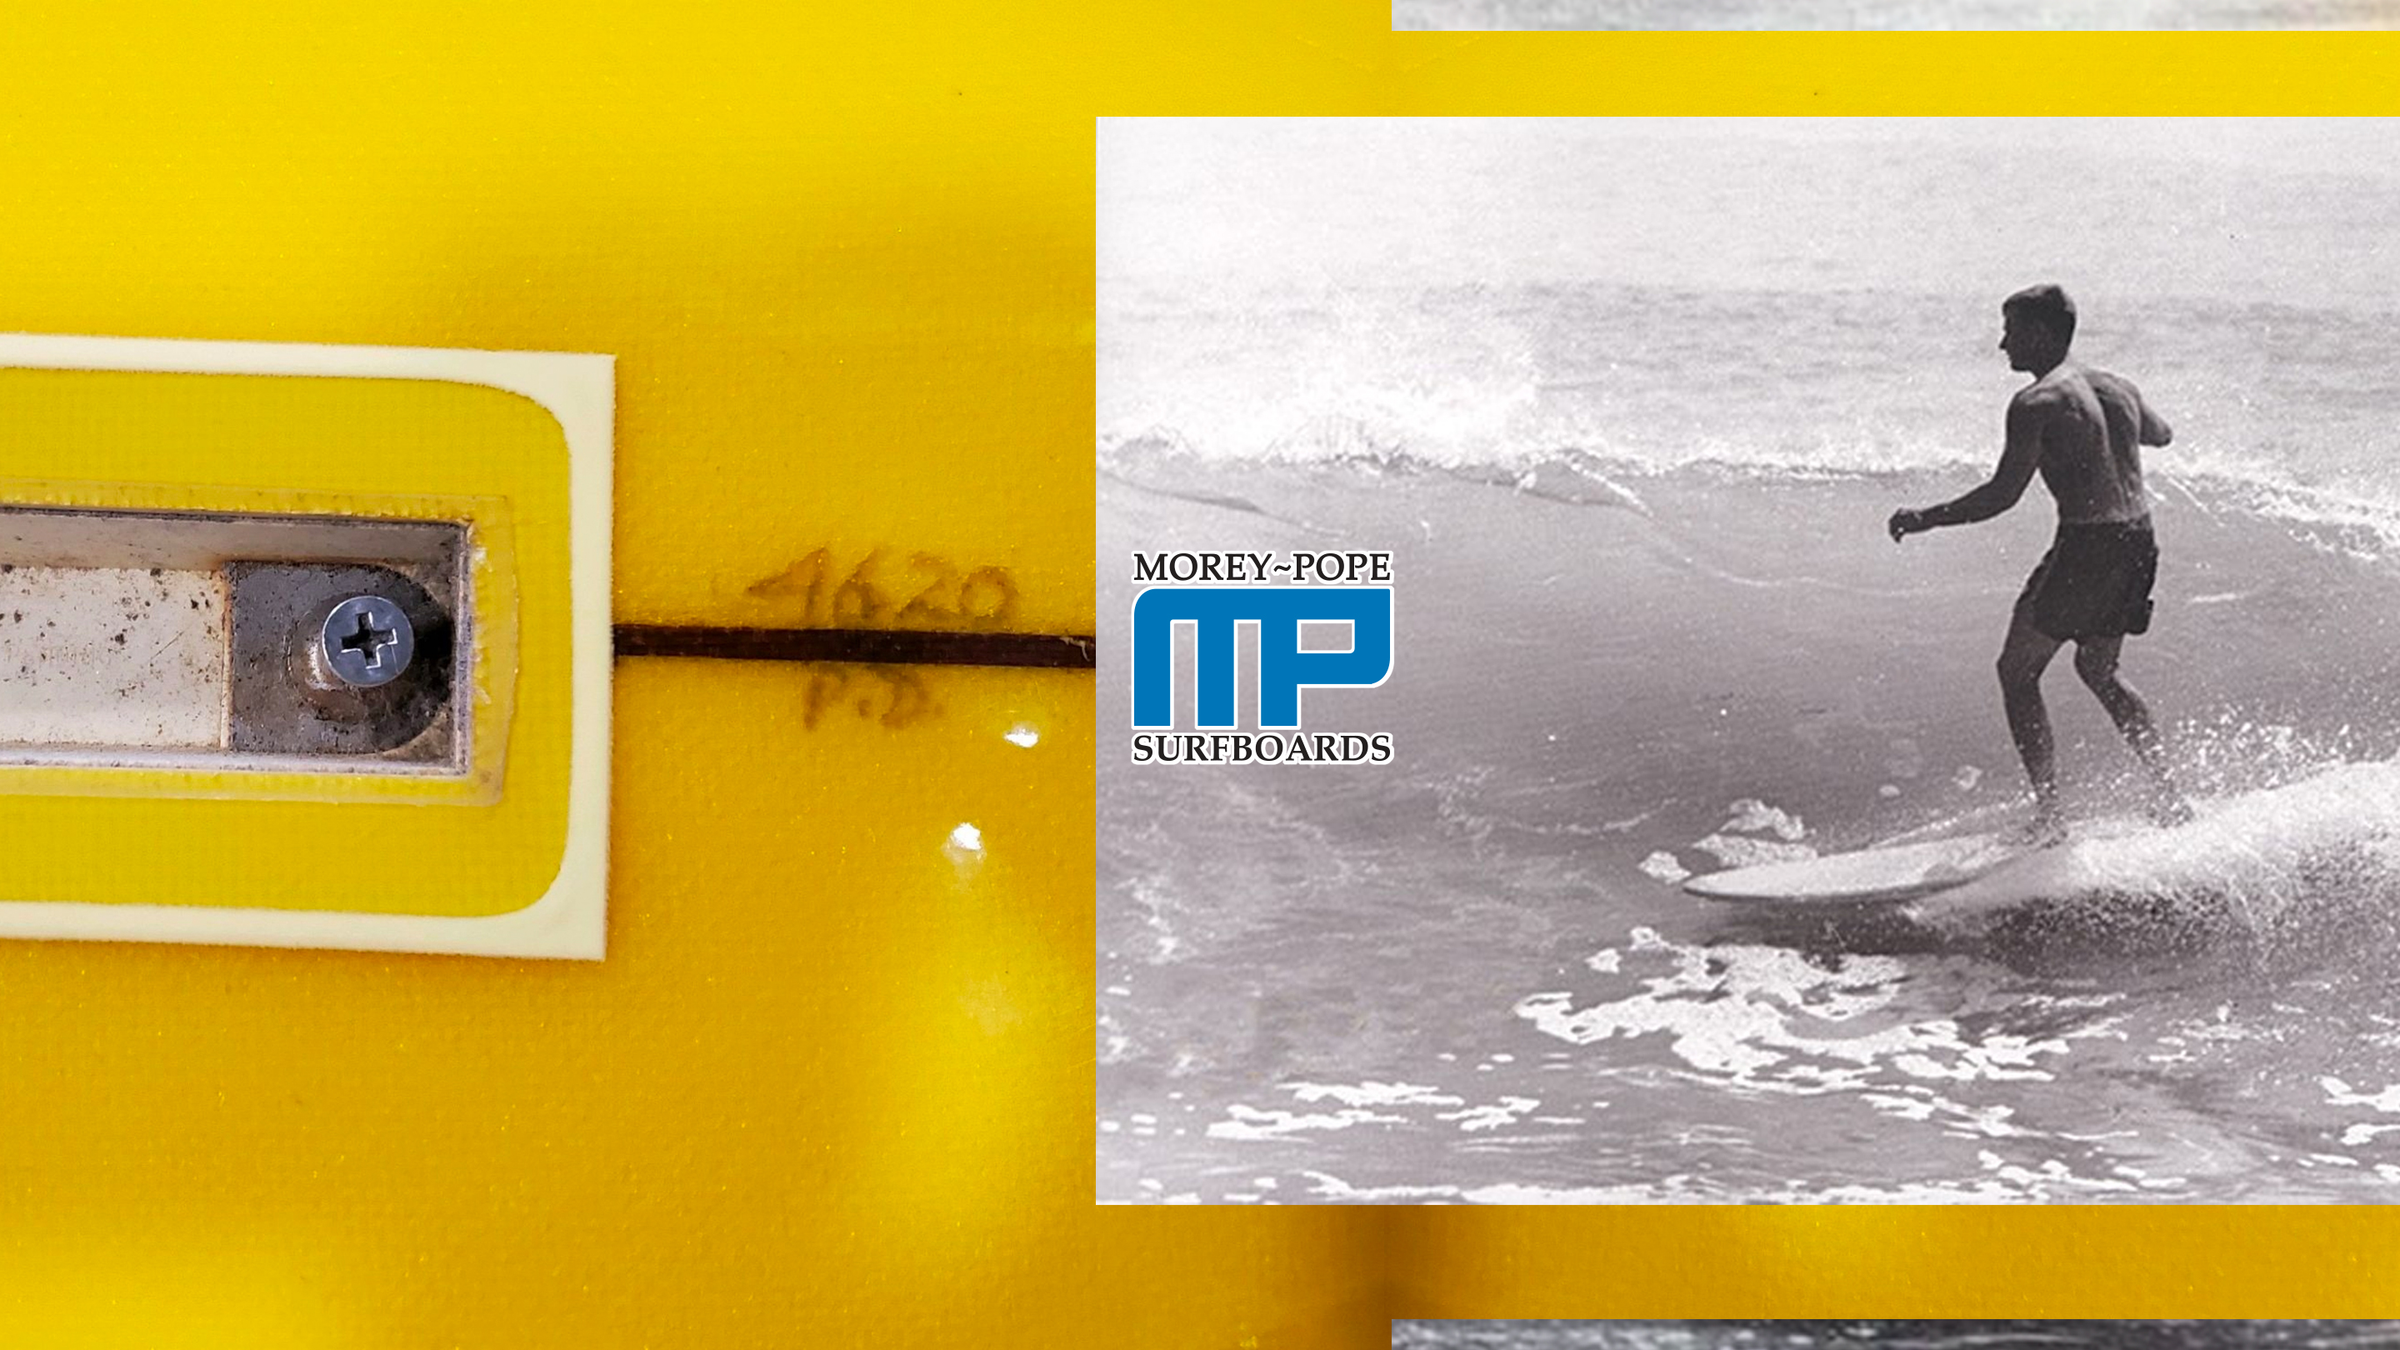 Morey-Pope Surfboards